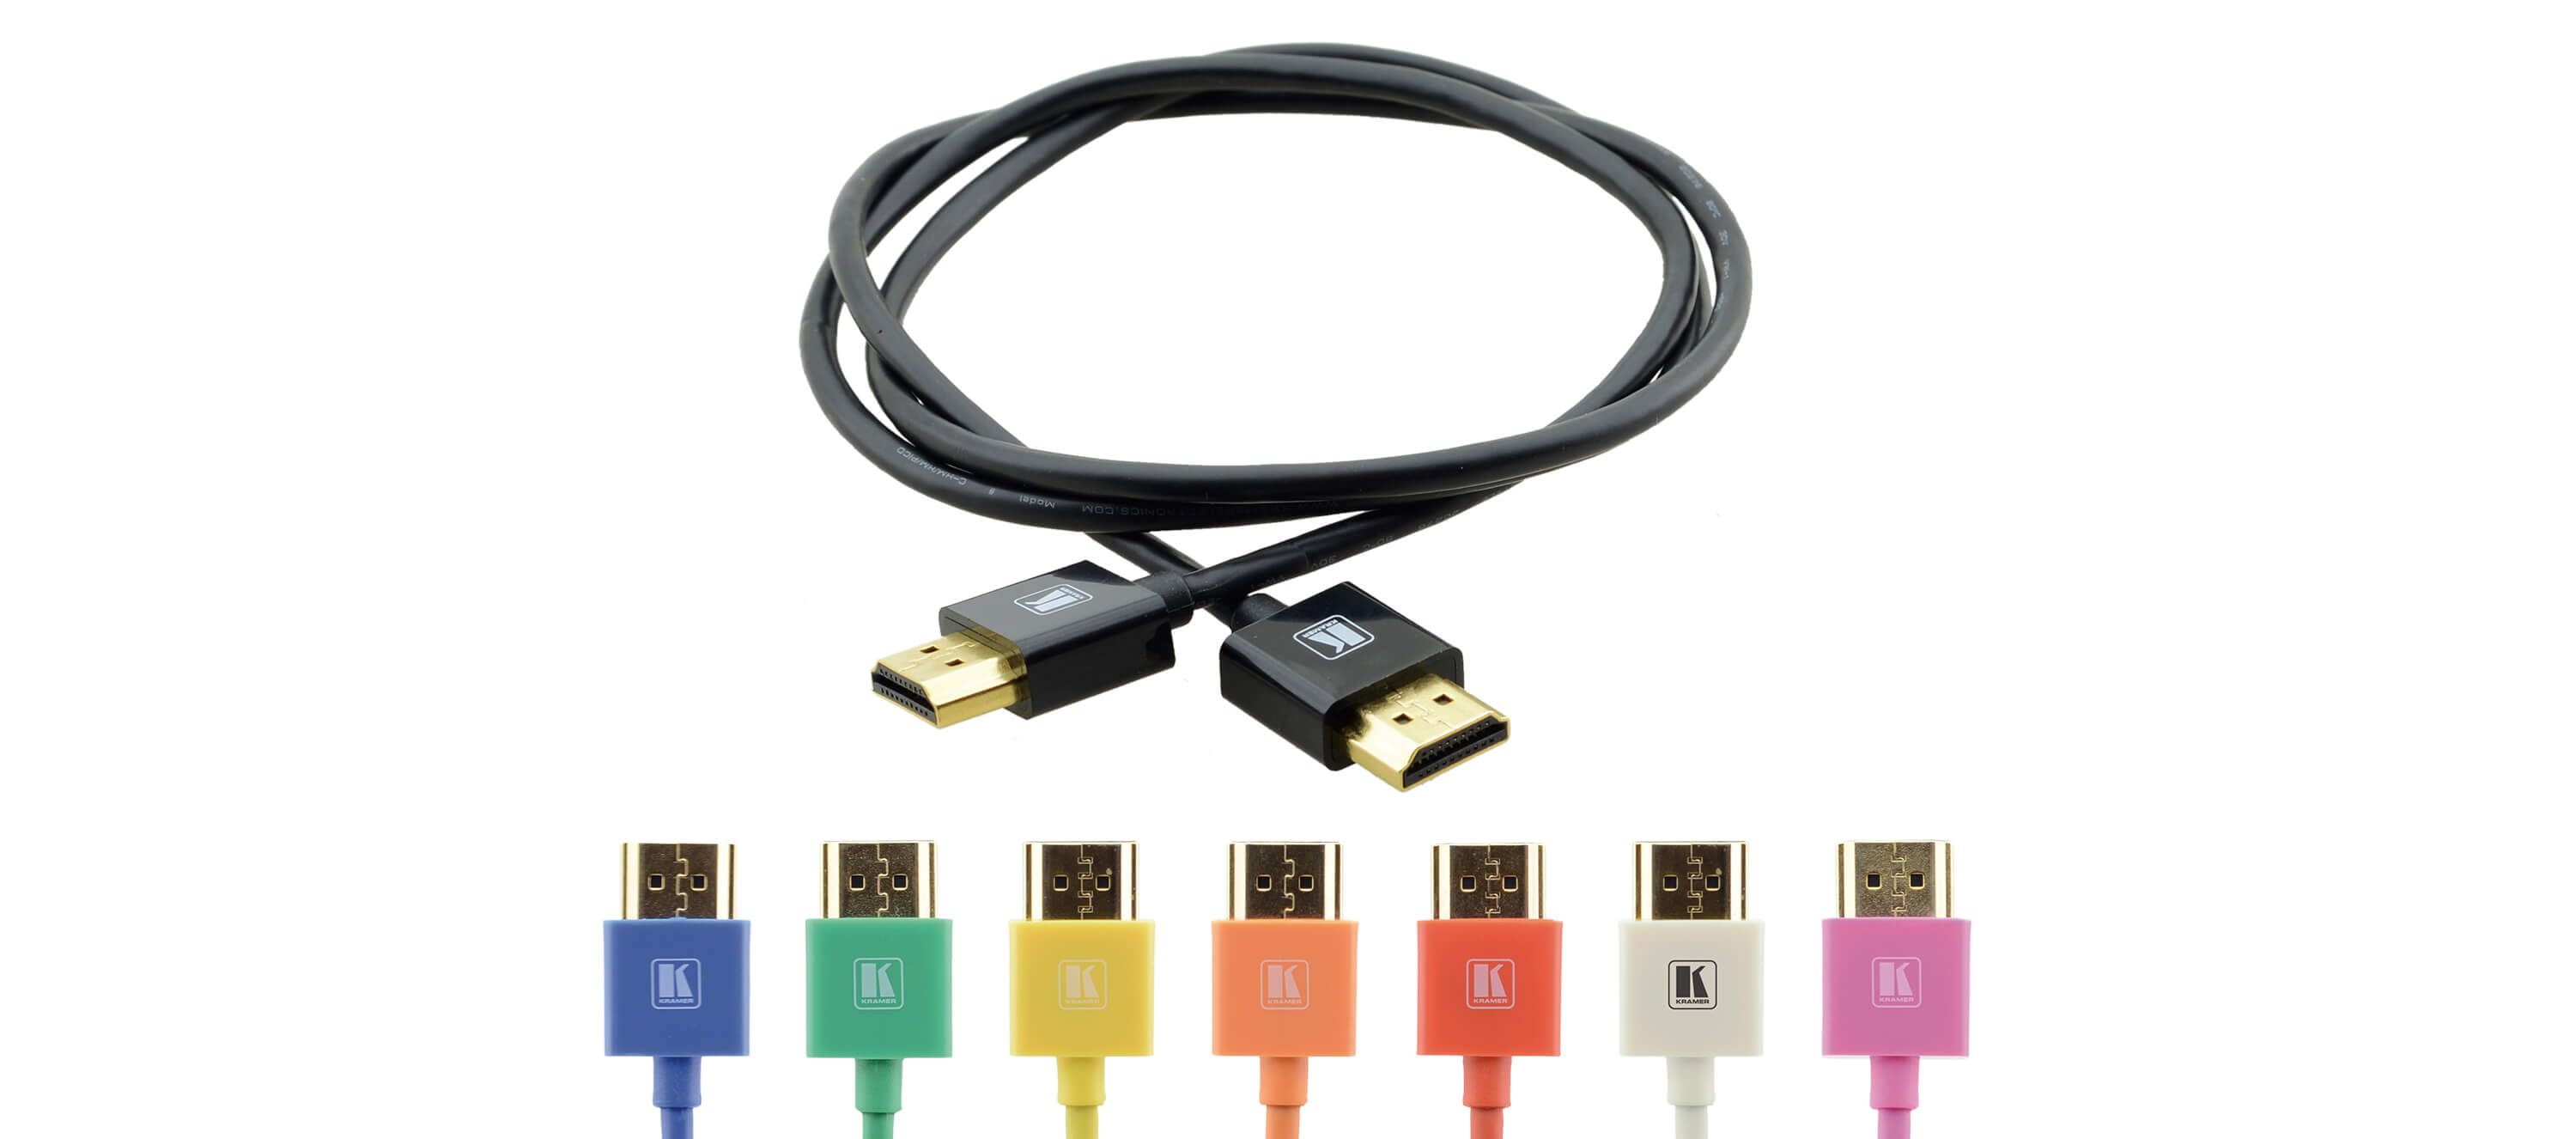 Kramer C-HM-HM-ETH-50 HDMI Cable with Ethernet, 50 Feet